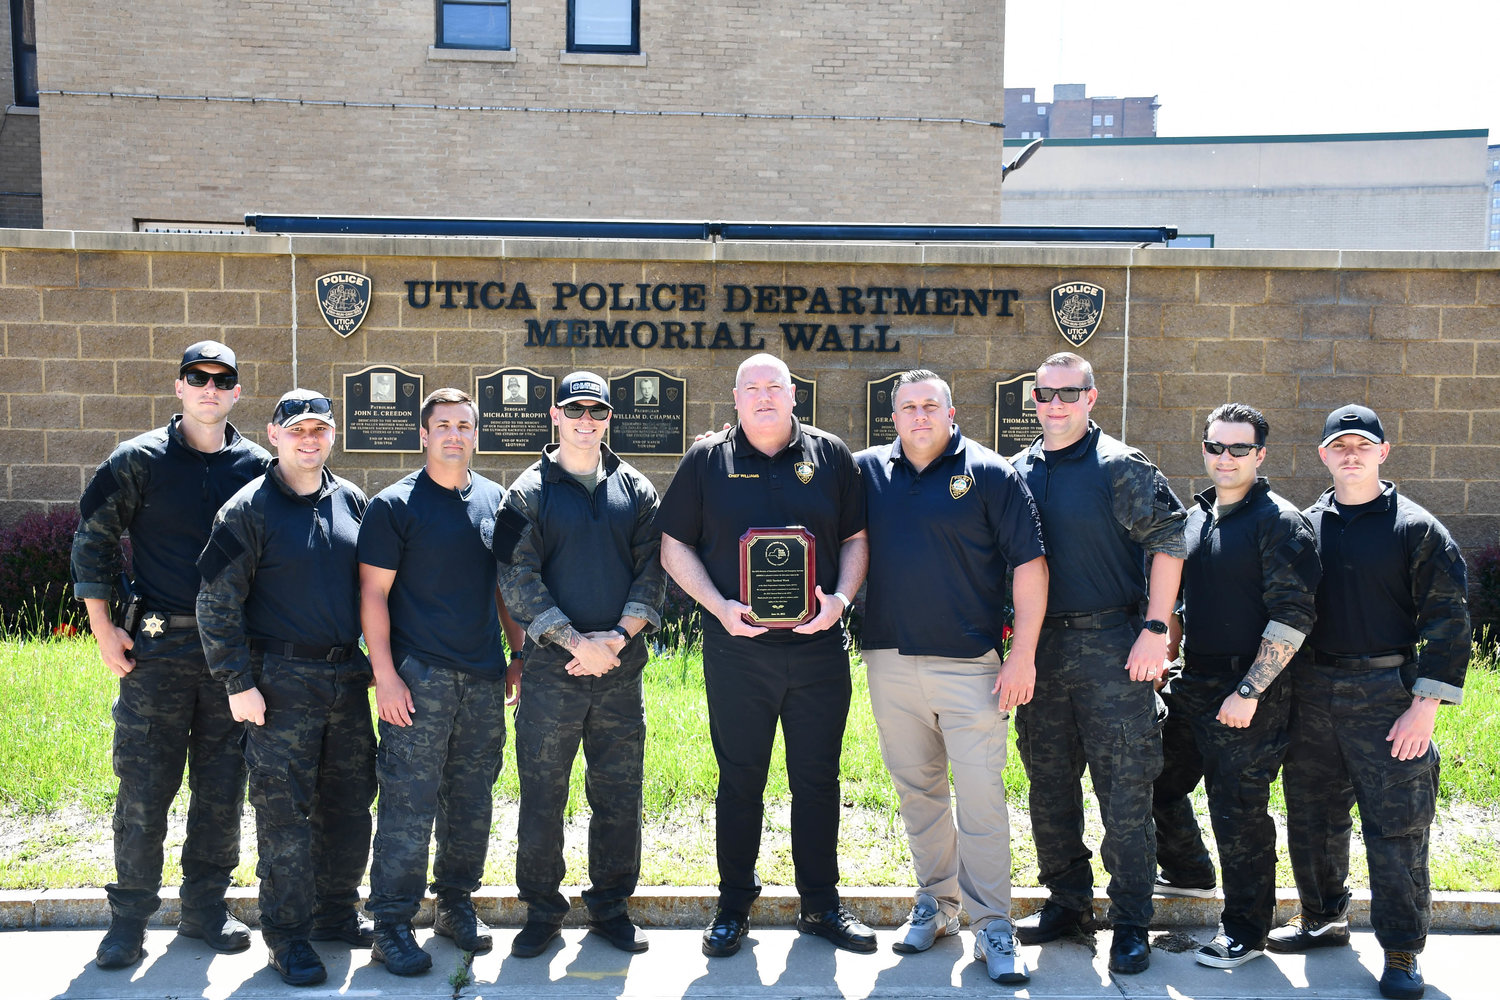 SWAT TEAM VICTORY — The Utica Metro SWAT Team was recognized as the winners of the Tactical Week training at the New York State Preparedness Center in Whitestown last week. Five SWAT teams from across the state competed in a series of high intensity training scenarios, and state officials said the Metro SWAT Team scored the highest. Here they are posing with Utica Police Chief Mark Williams, center. The Metro SWAT Team is comprised of officers from the Utica and New Hartford police departments, as well as the Oneida County Sheriff’s Office.